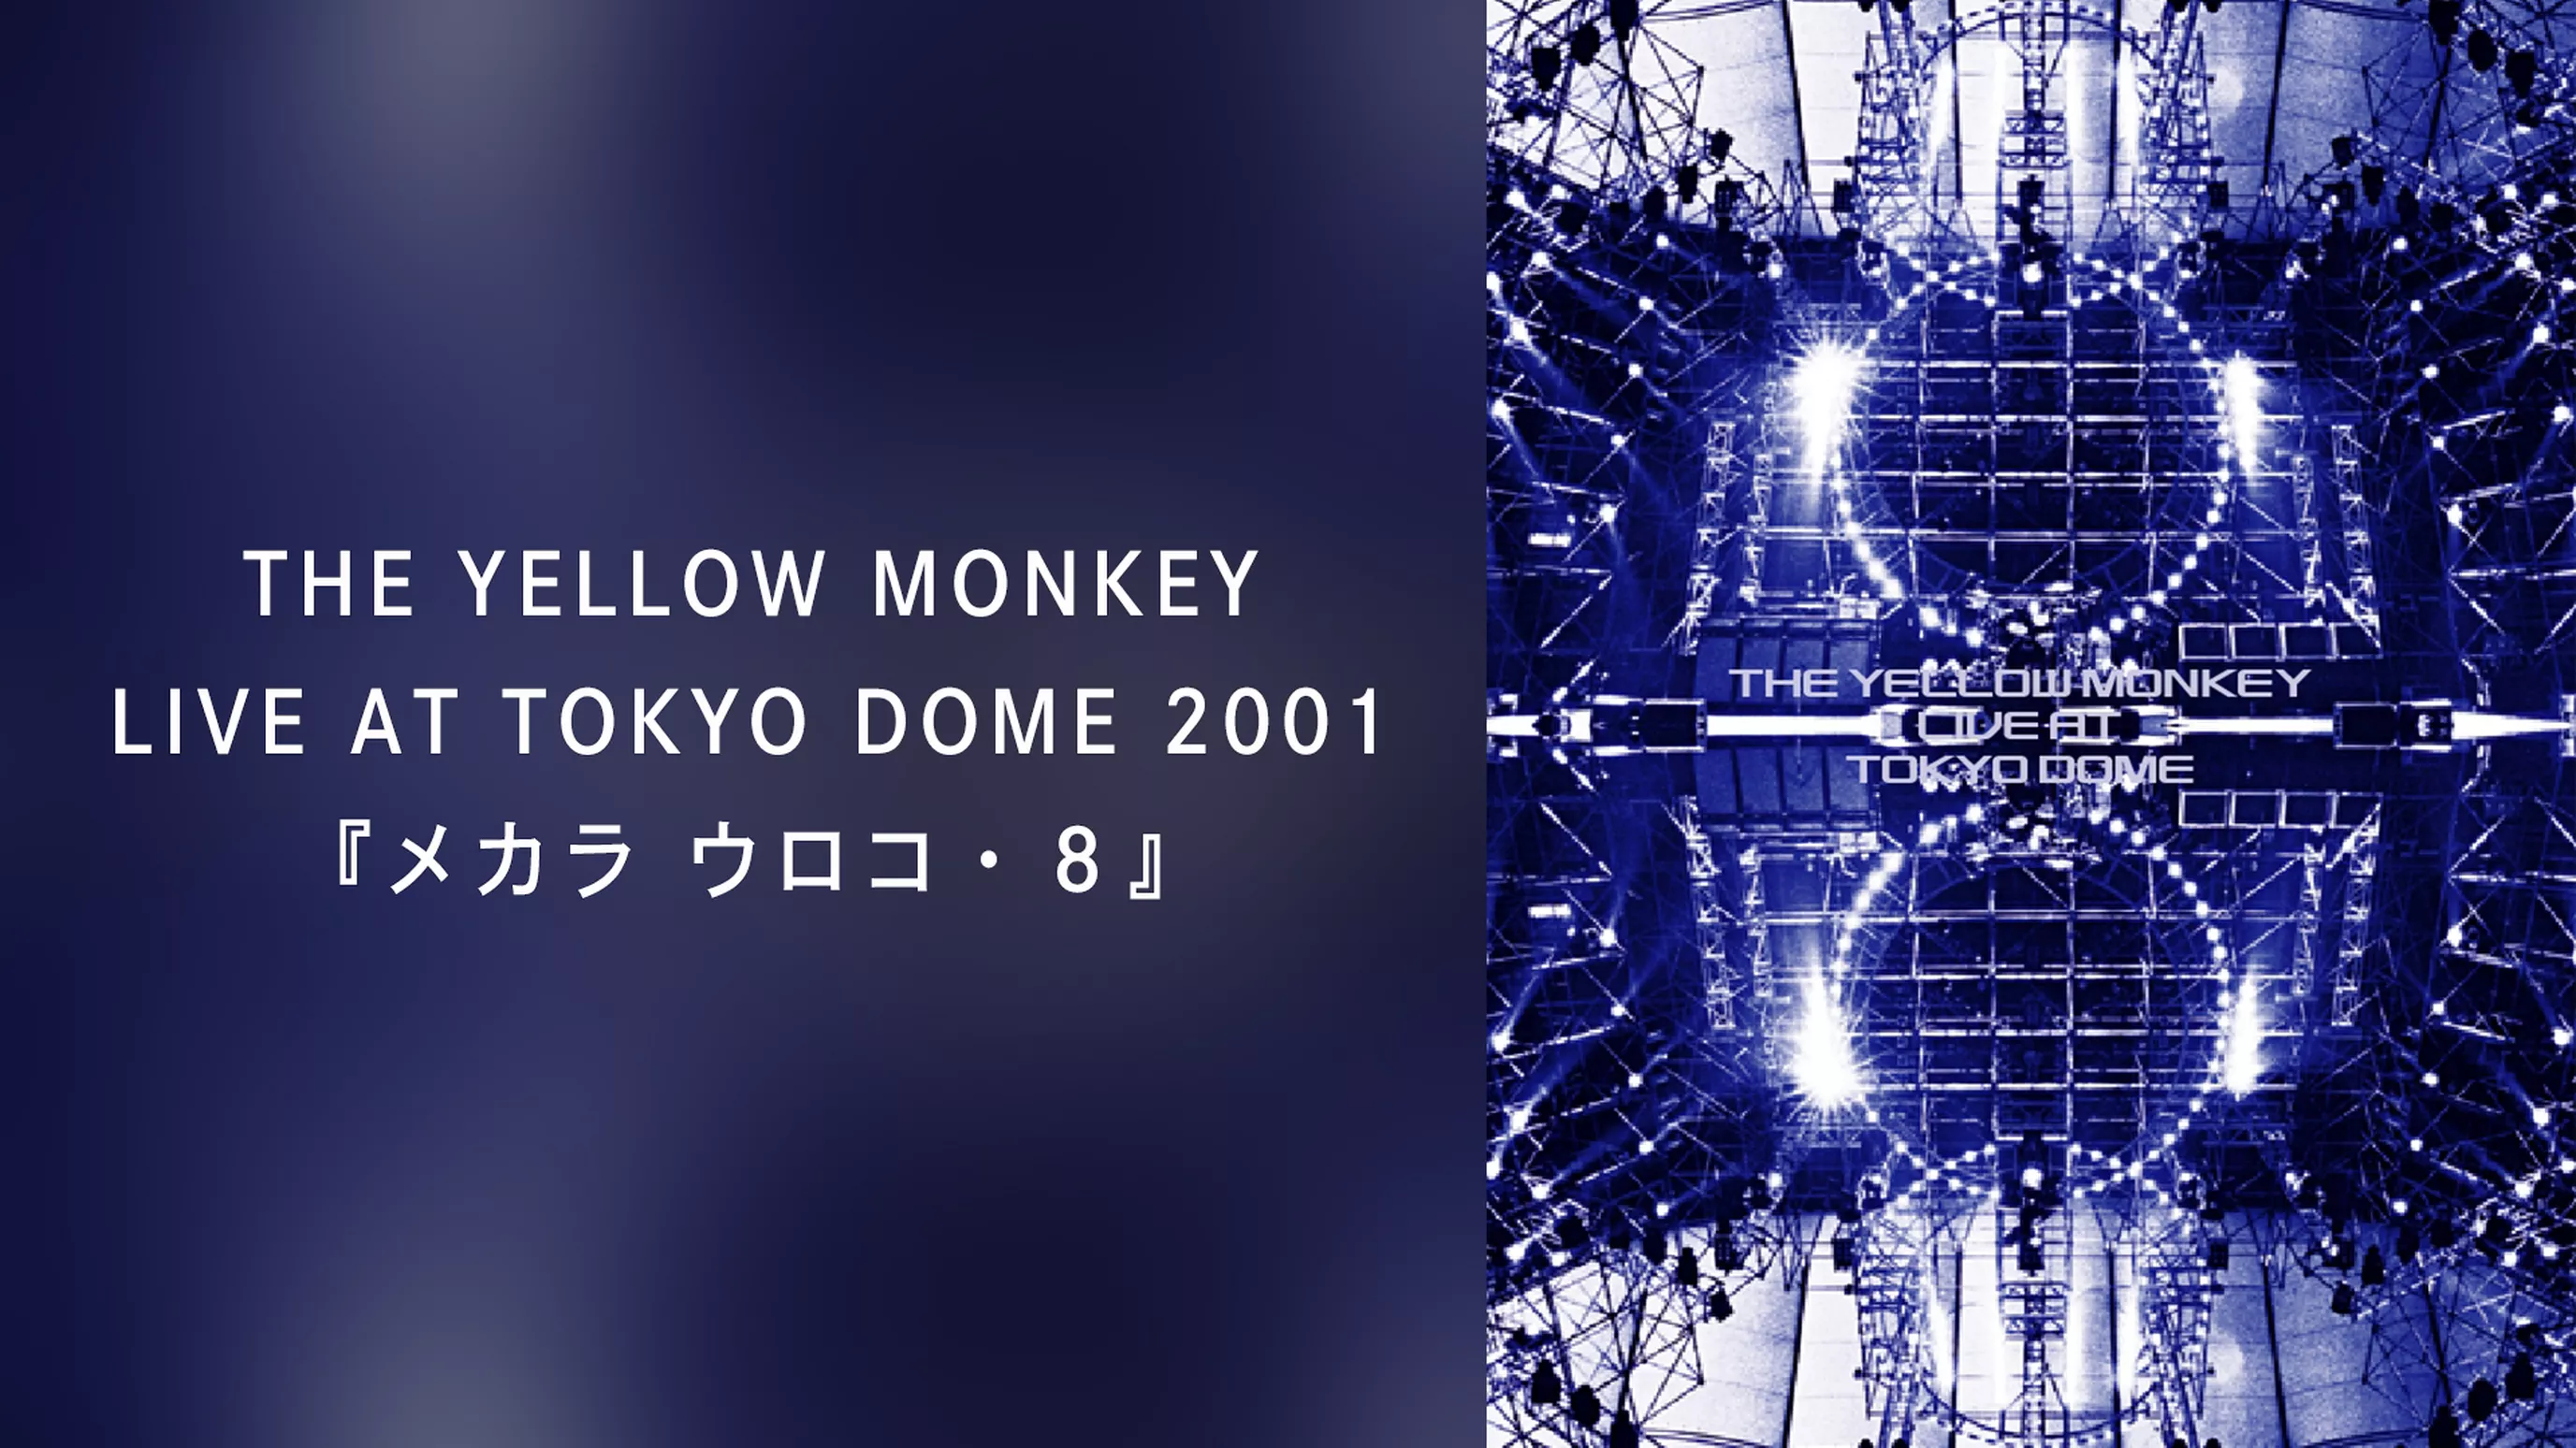 THE YELLOW MONKEY LIVE AT TOKYO DOME 2001『メカラ ウロコ・８』